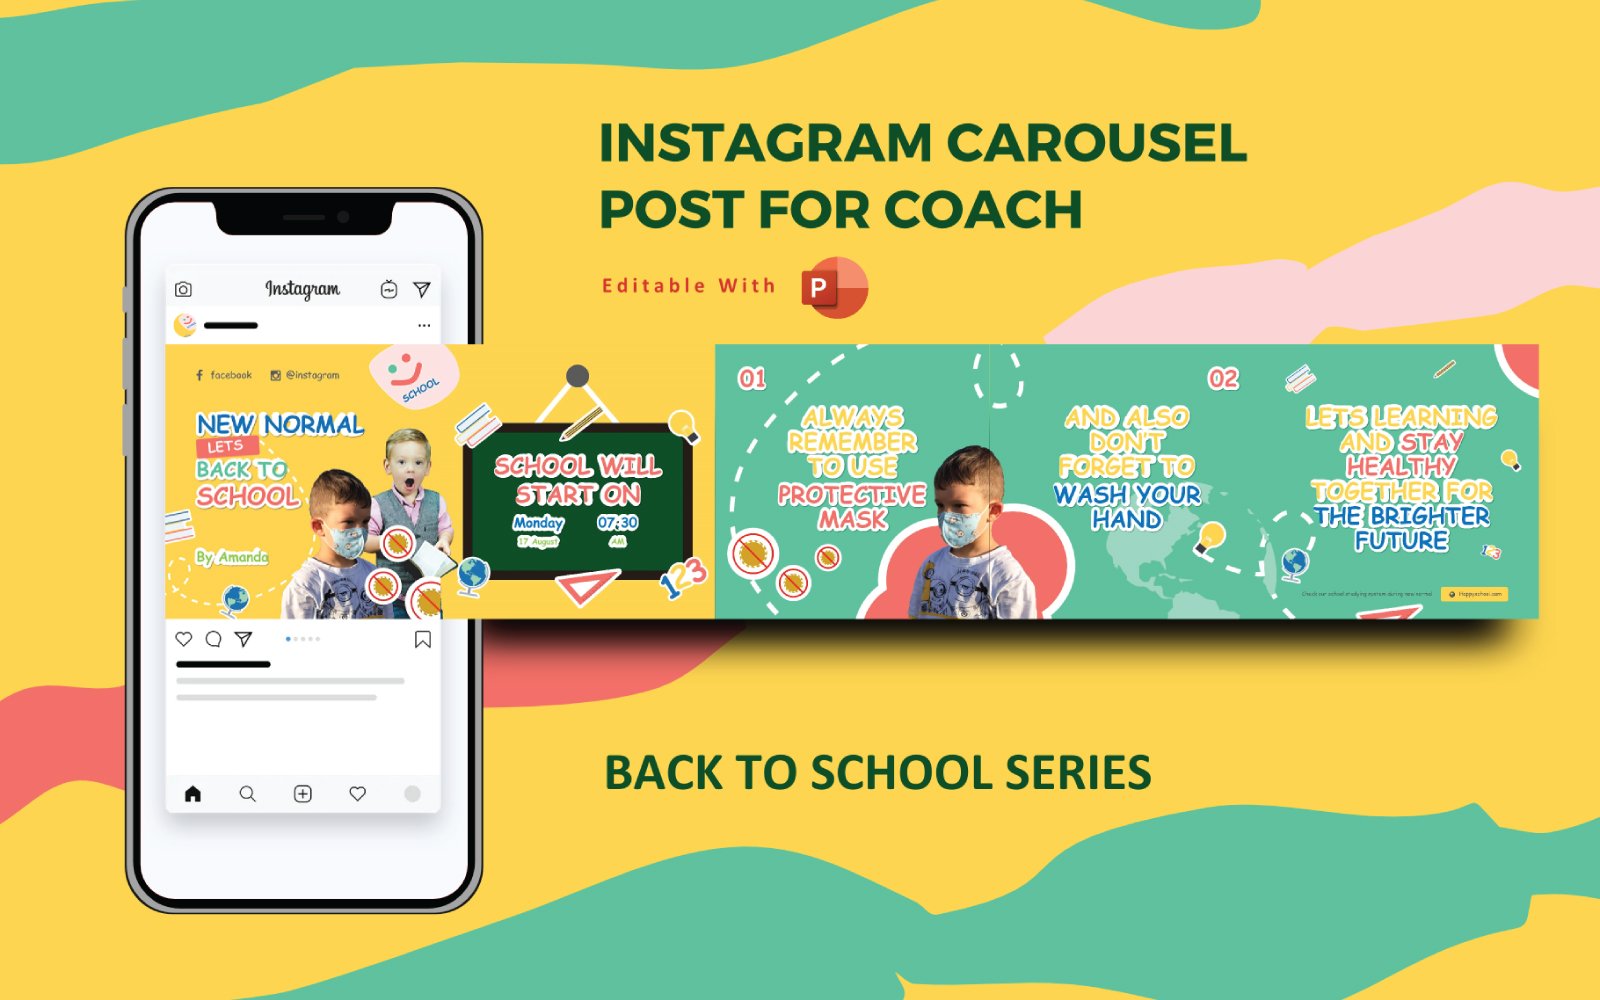 Back to School New Normal - Instagram Carousel Powerpoint Social Media Template